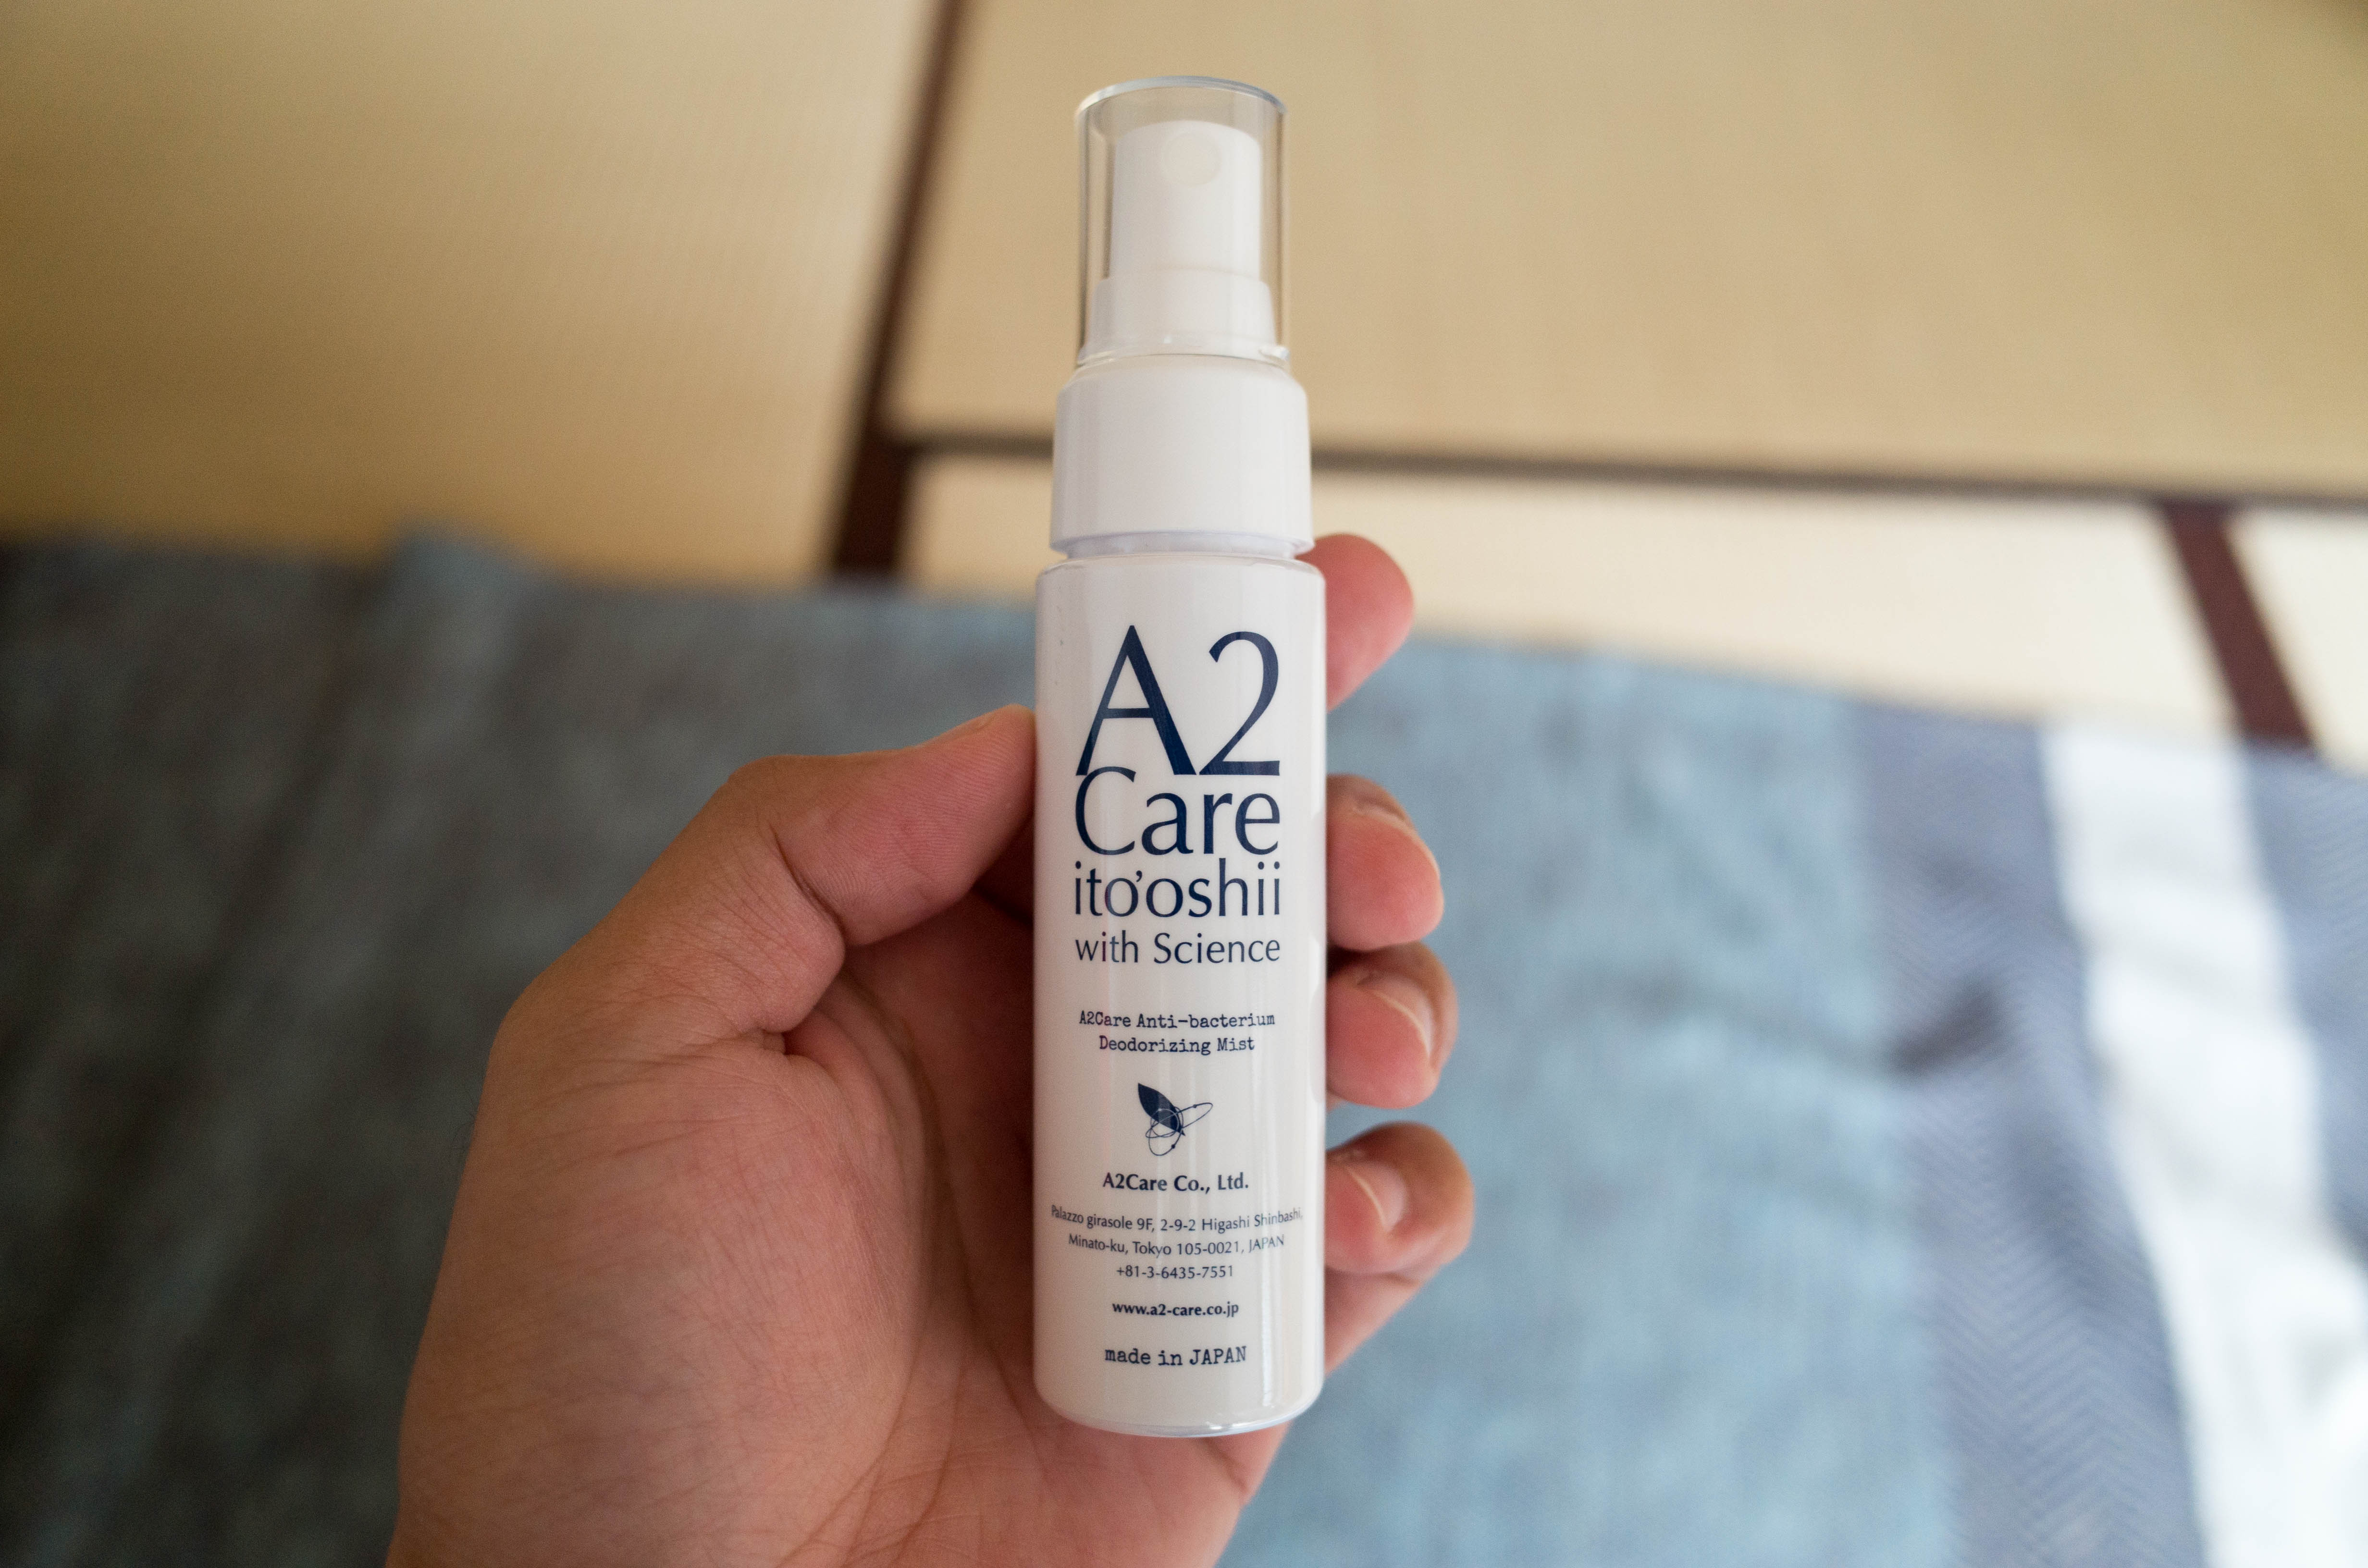 A2Care ??? / 楽天マラソン♡まだ買えます!A2care | ♡asaブログ♡アラフォー主婦のお買い物日記 - With rosamund pike, peter dinklage, eiza gonzález, dianne wiest.